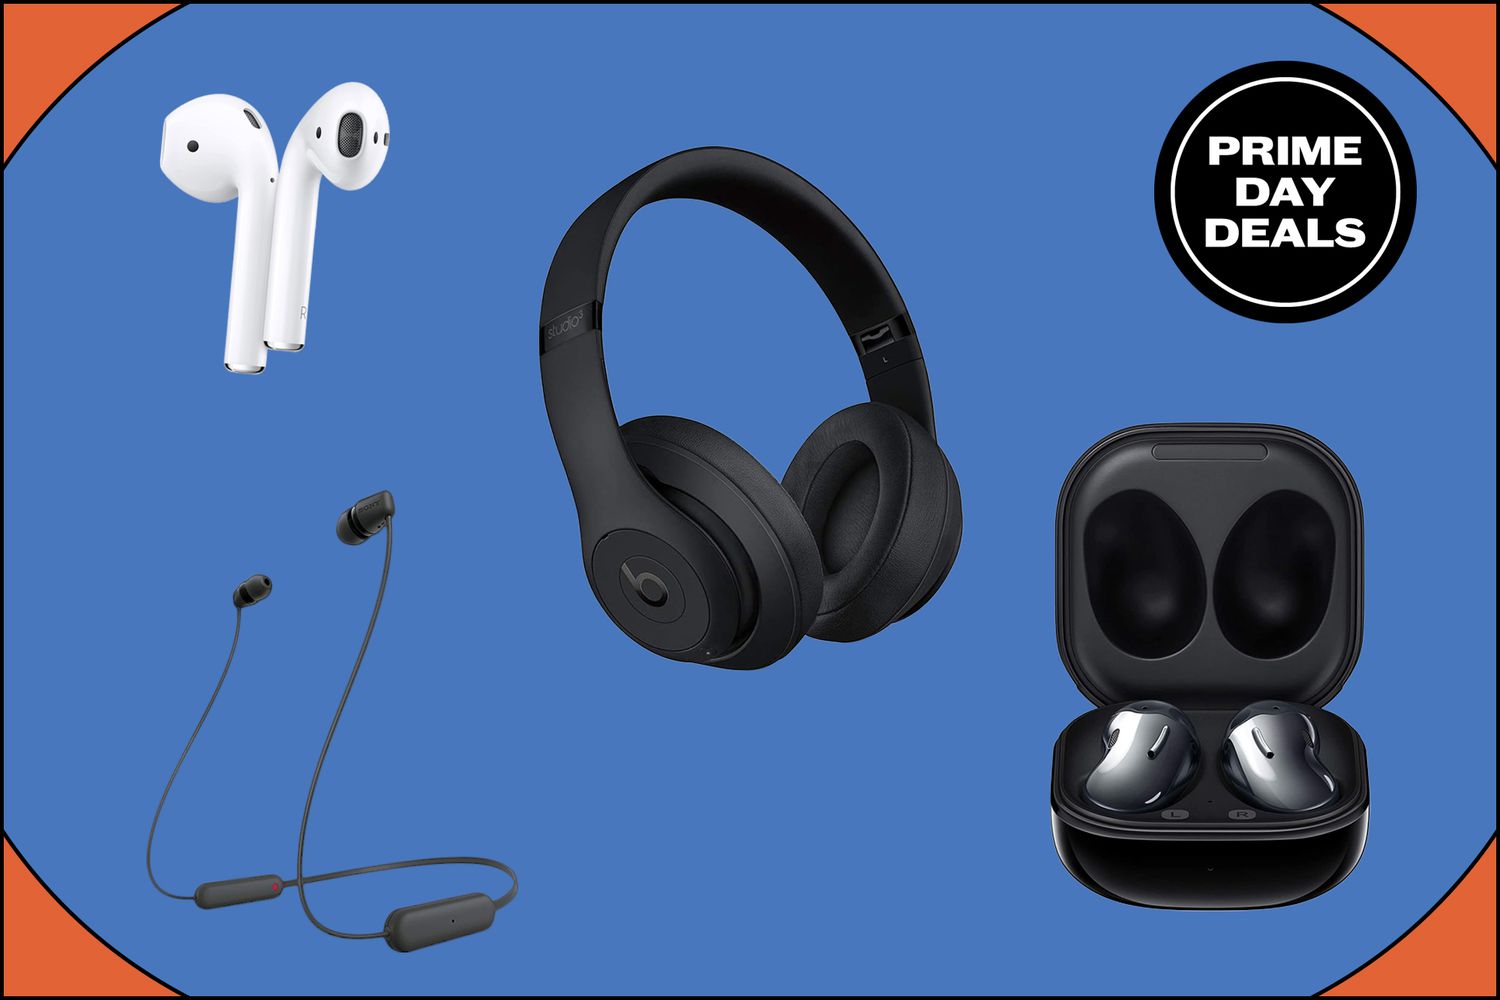 For Amazon Prime Day, headphones from Beats, Apple, Sony, and Samsung are on sale for up to 57 percent off